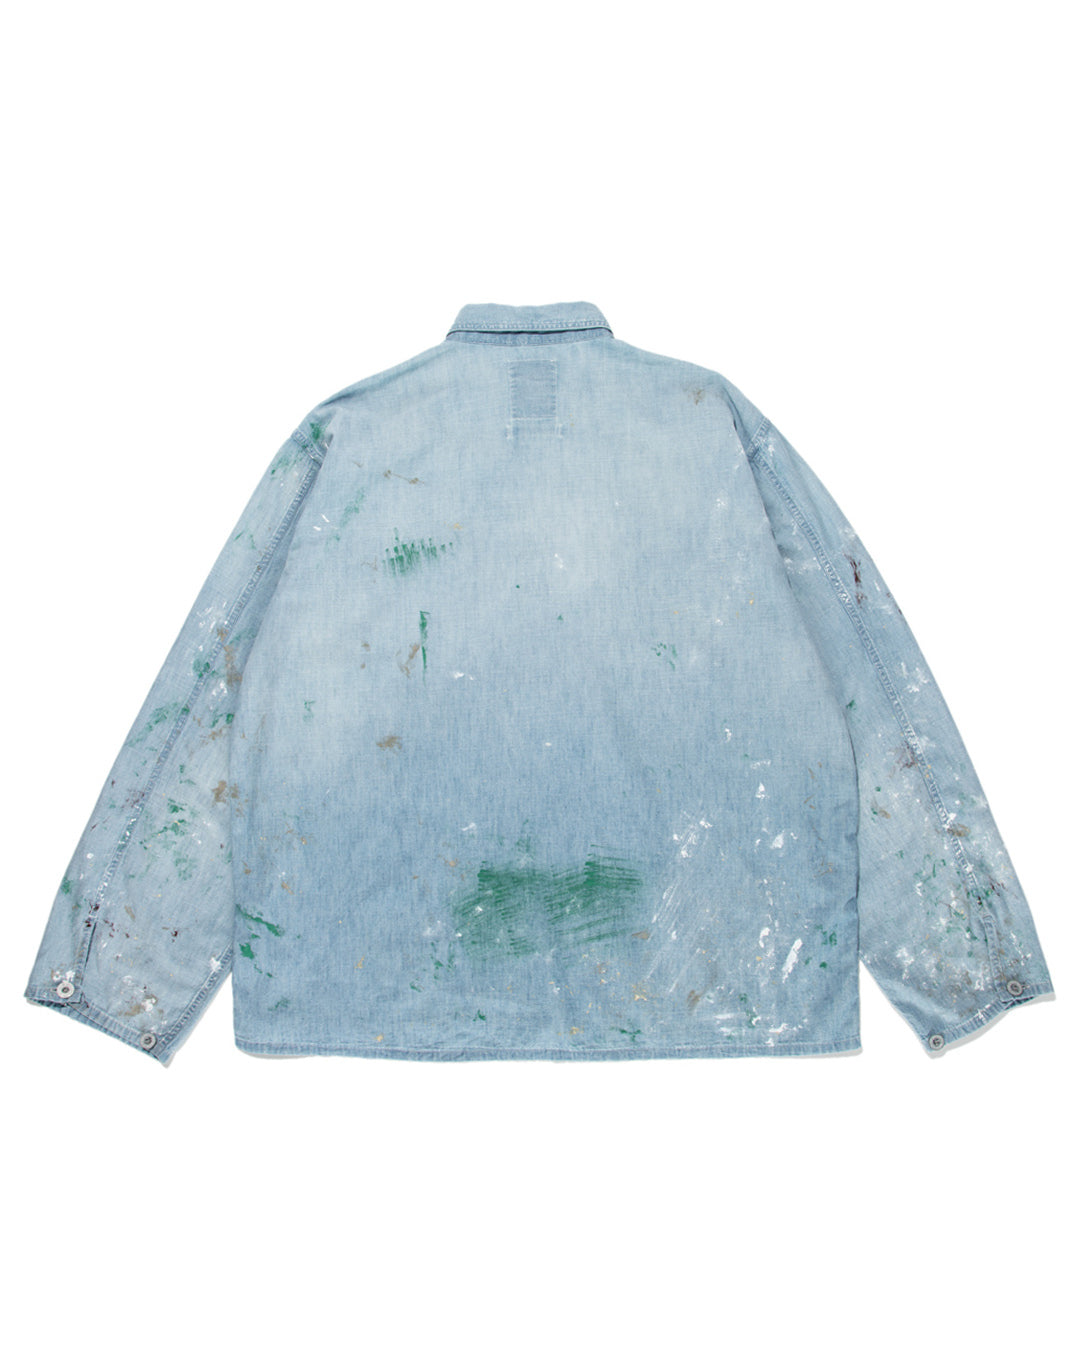 23aw US ARMY P/O CHAMBRAY SHIRTS PAINTED袖丈67cm